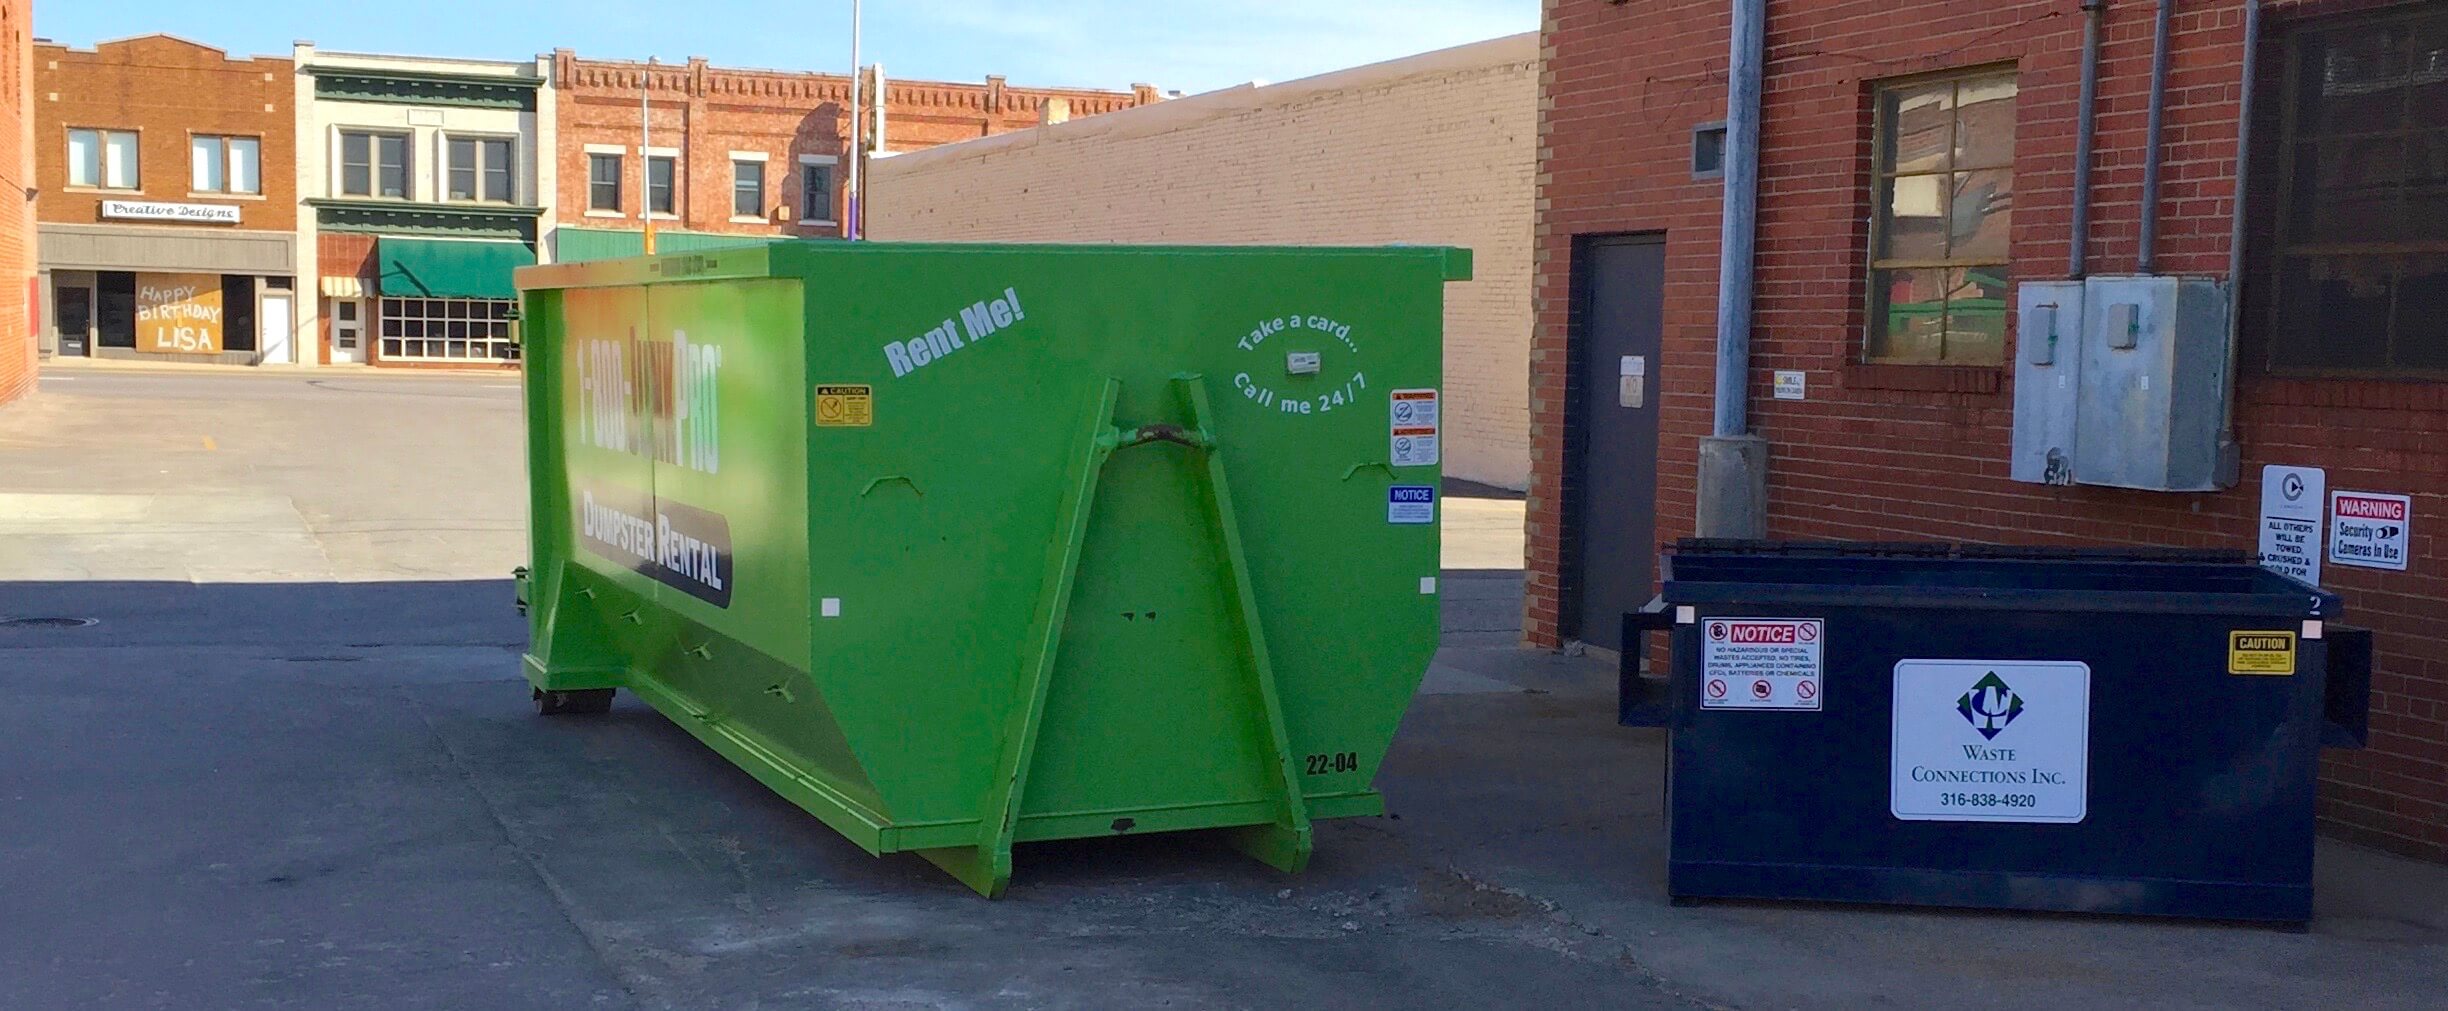 Commercial Dumpster Rental-Palm Beach County’s Best Dumpster Removal Services-We Offer Residential and Commercial Dumpster Removal Services, Dumpster Rentals, Bulk Trash, Demolition Removal, Junk Hauling, Rubbish Removal, Waste Containers, Debris Removal, 10 Yard Containers, 15 Yard to 20 Yard to 30 Yard to 40 Yard Container Rentals, and much more!